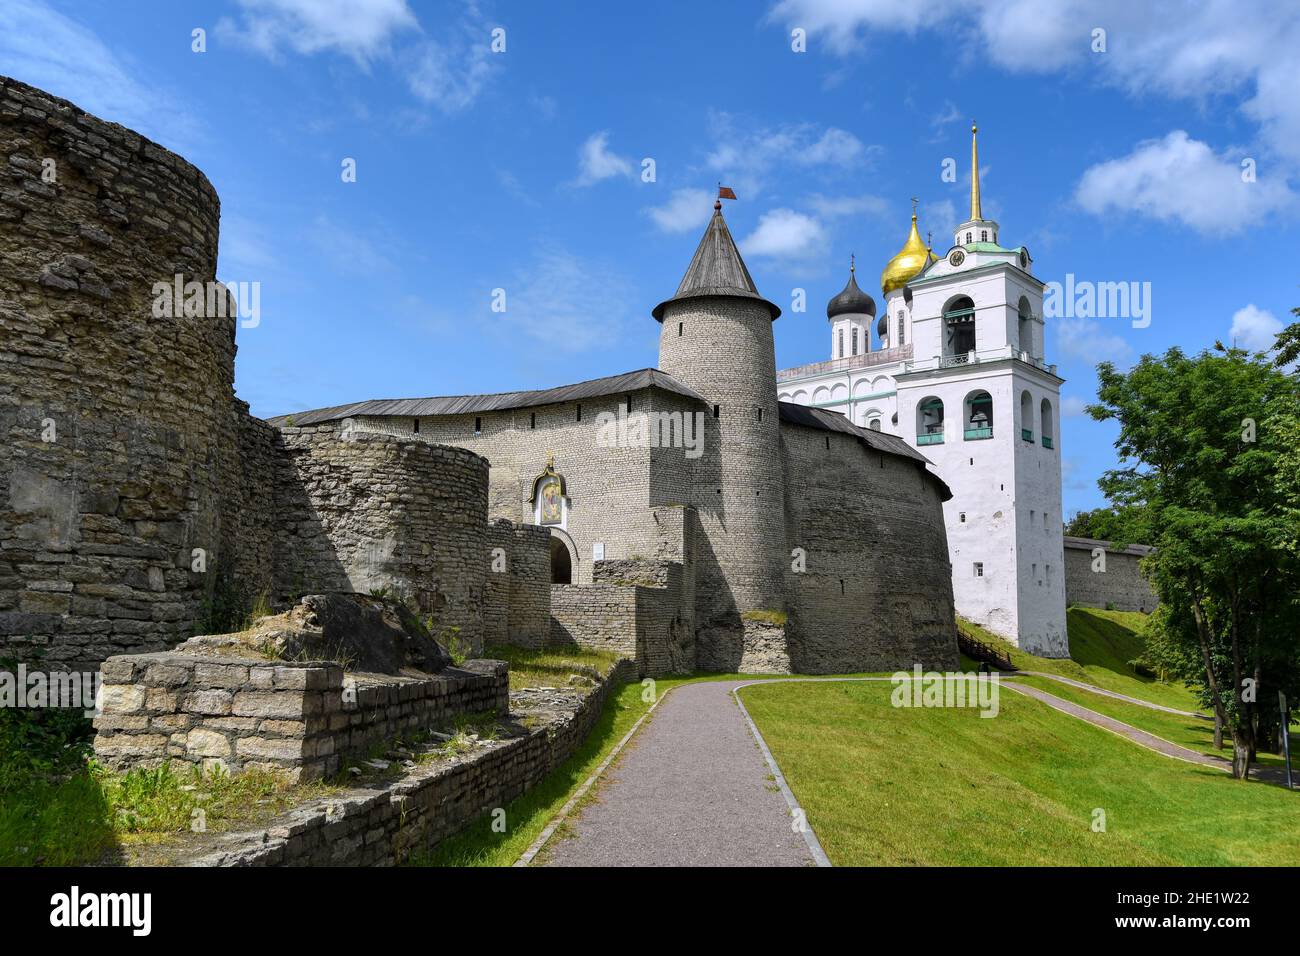 The Trinity cathedral and the walls of historical Pskov Kremlin in the Pskov city, Russia Stock Photo